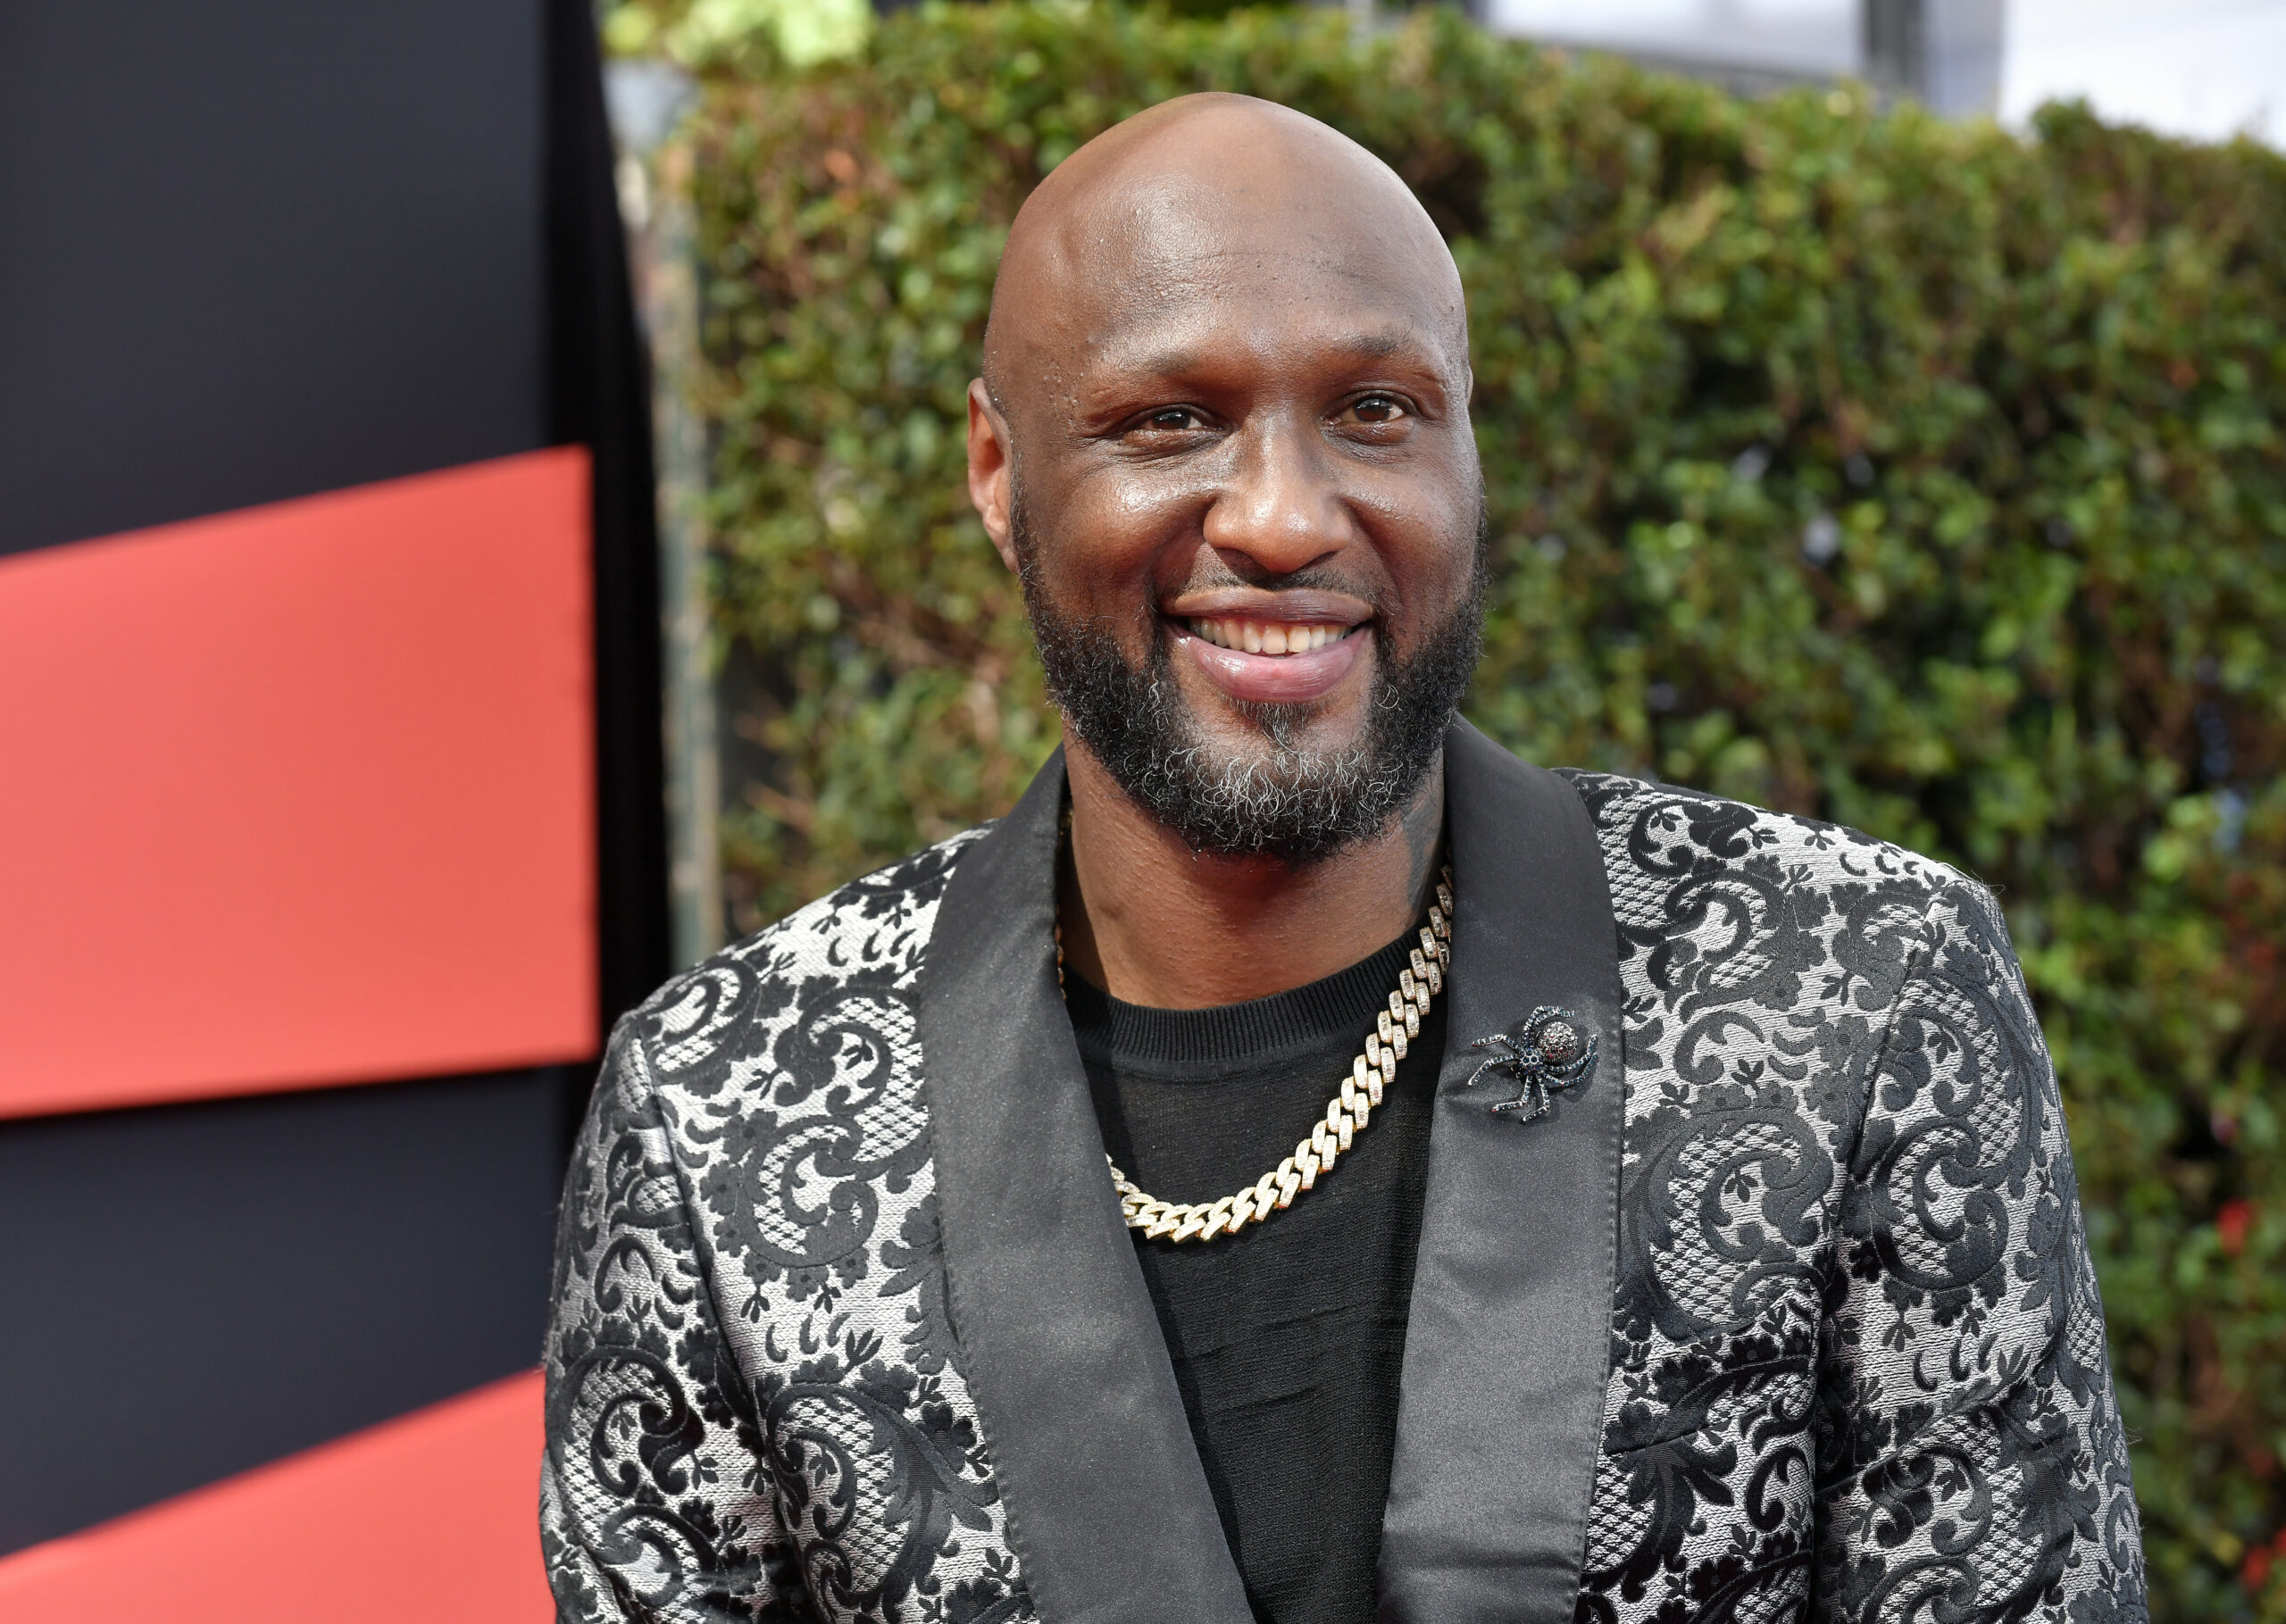 Lamar Odom Involved In Car Crash, Smashes Up His Mercedes